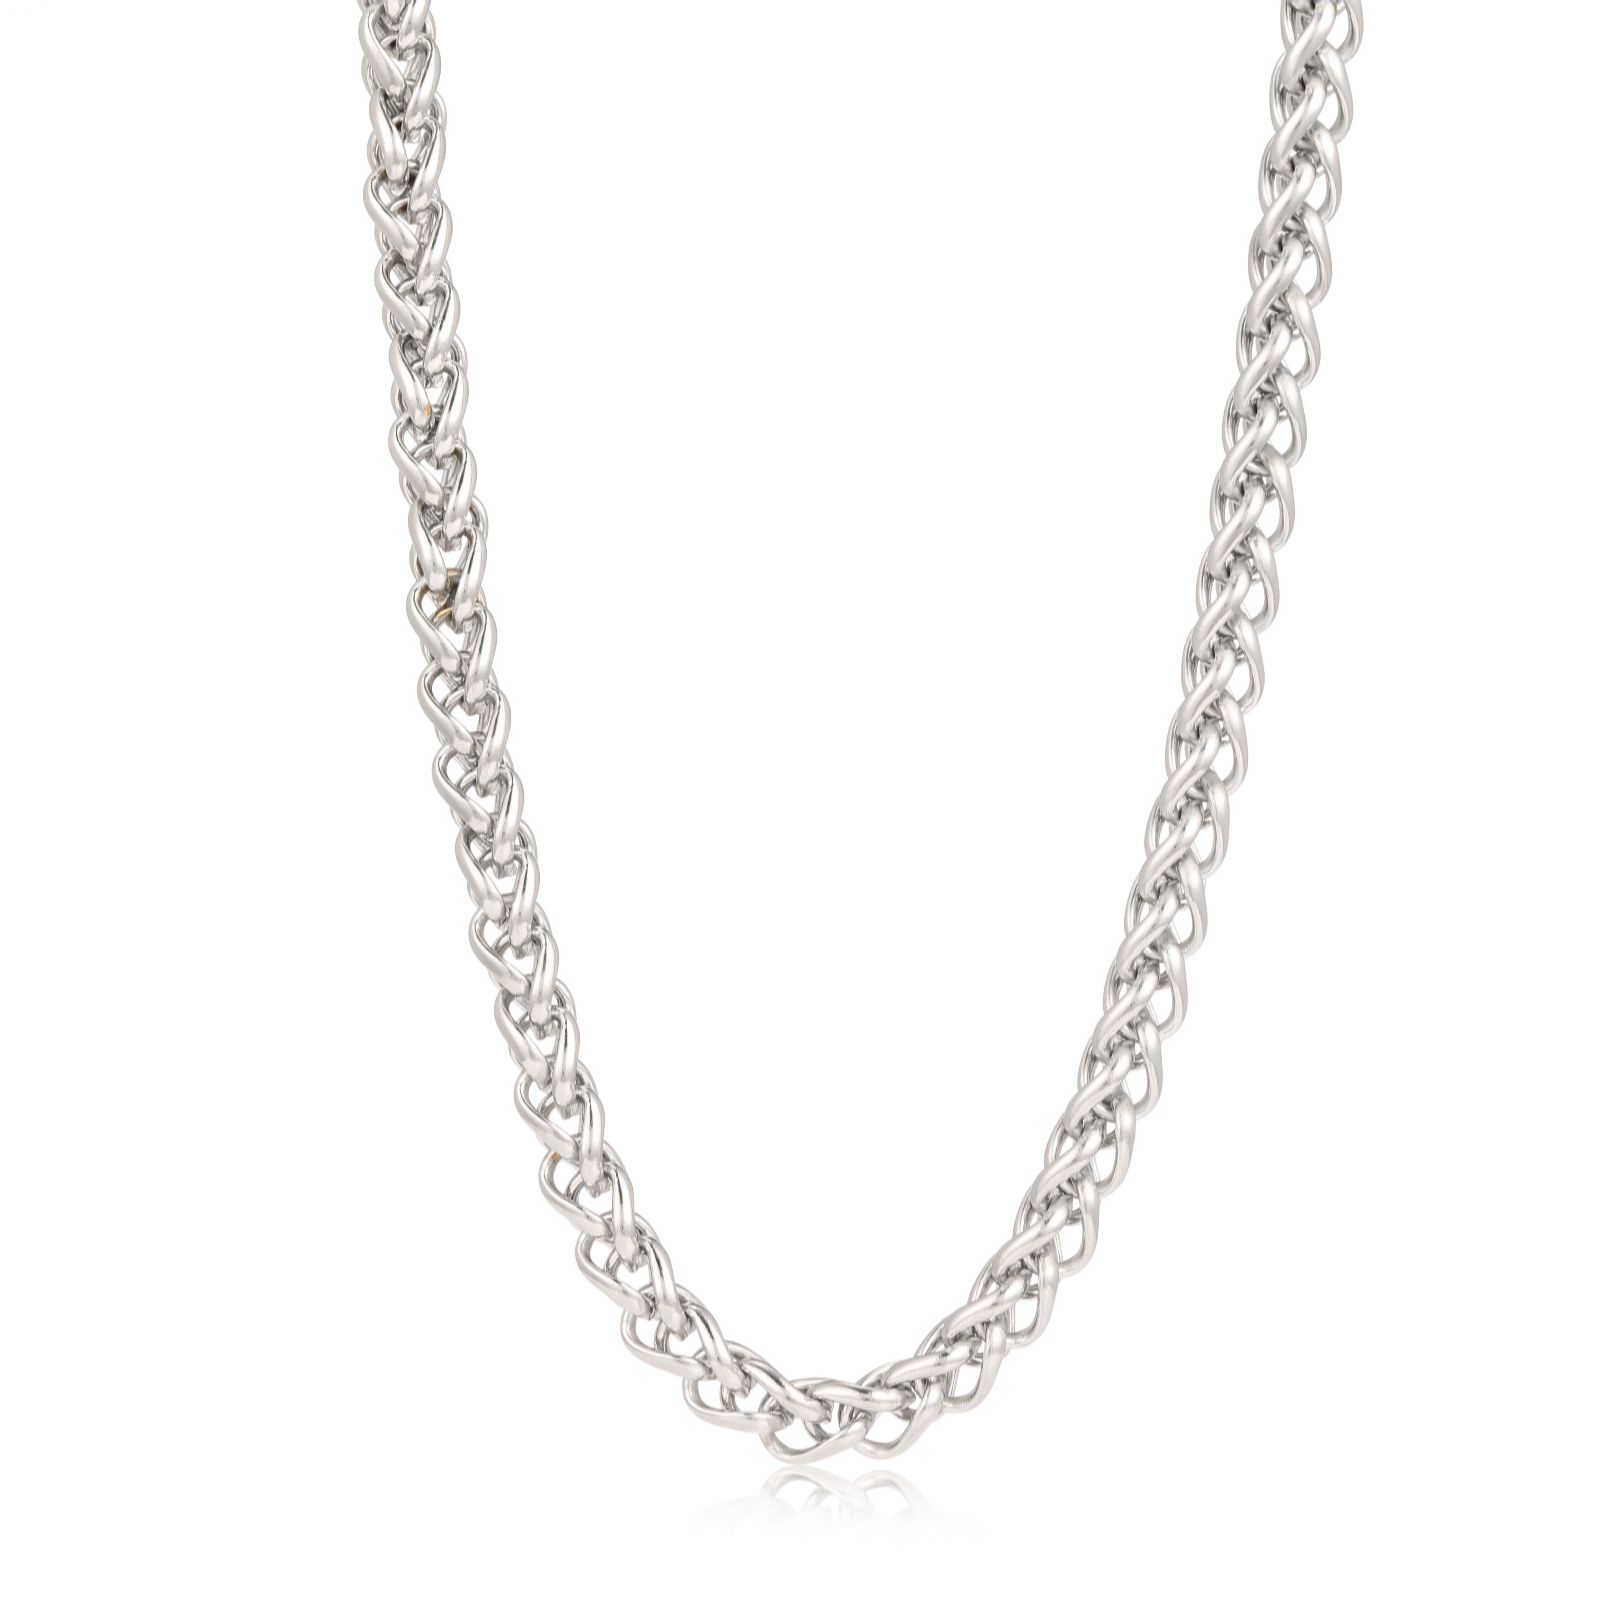 Steel by Diamonique Chain Link Collar 45cm Necklace Stainless Steel ...